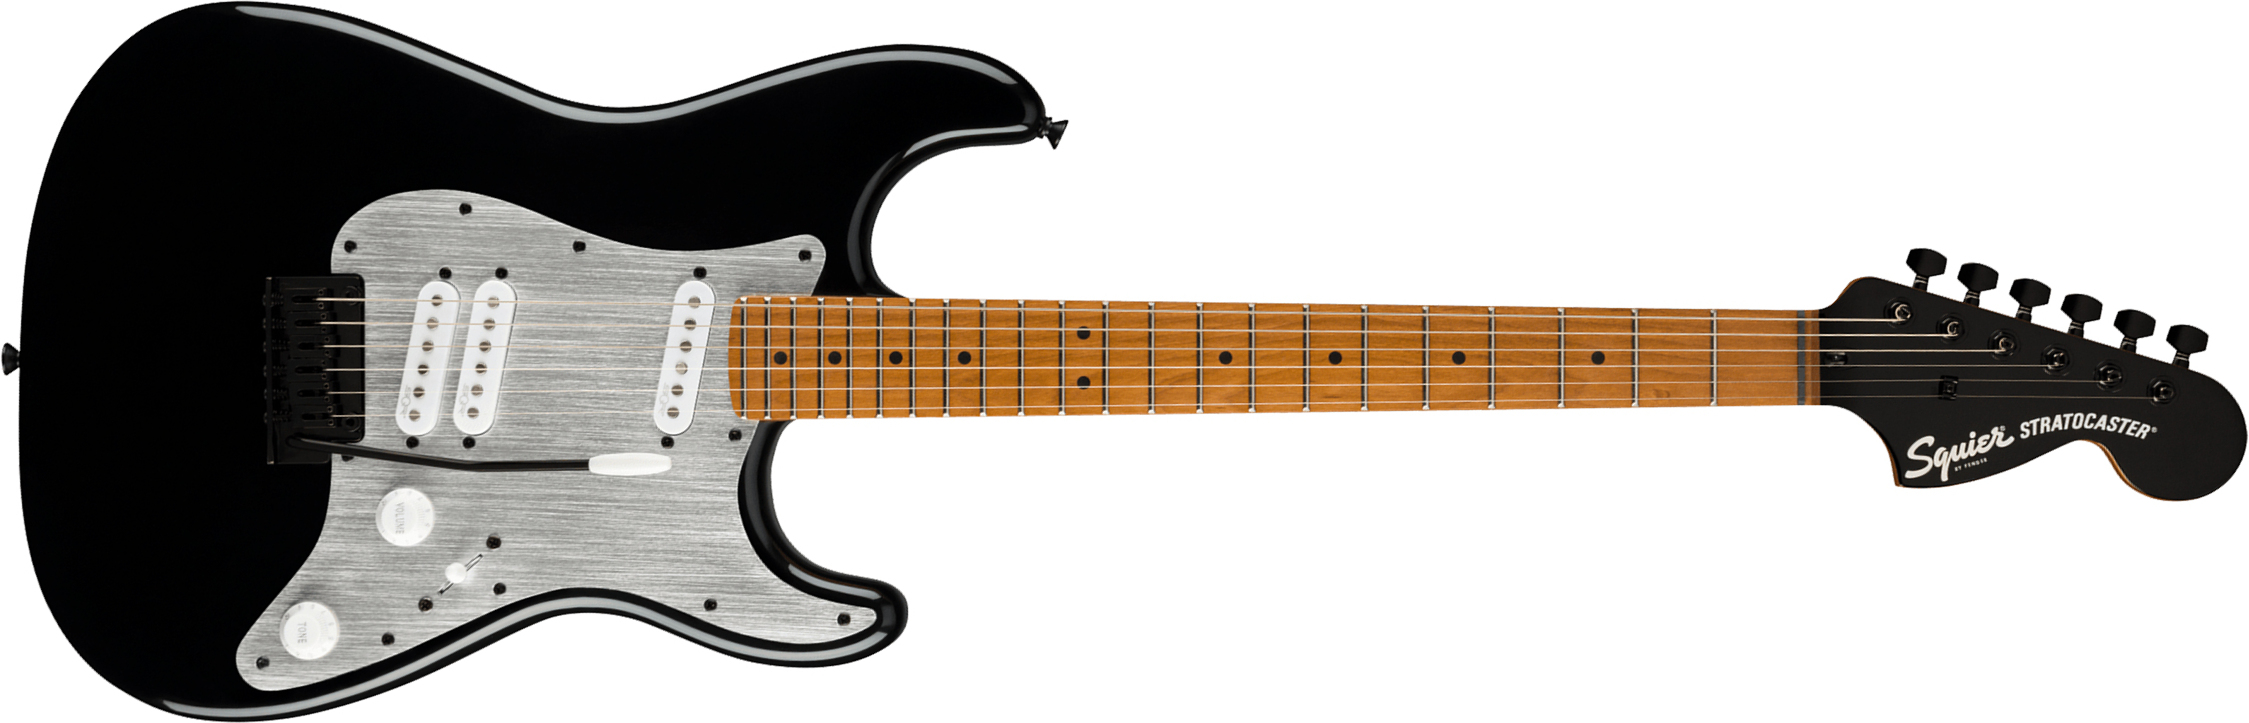 Squier Strat Contemporary Special Sss Trem Mn - Black - E-Gitarre in Str-Form - Main picture